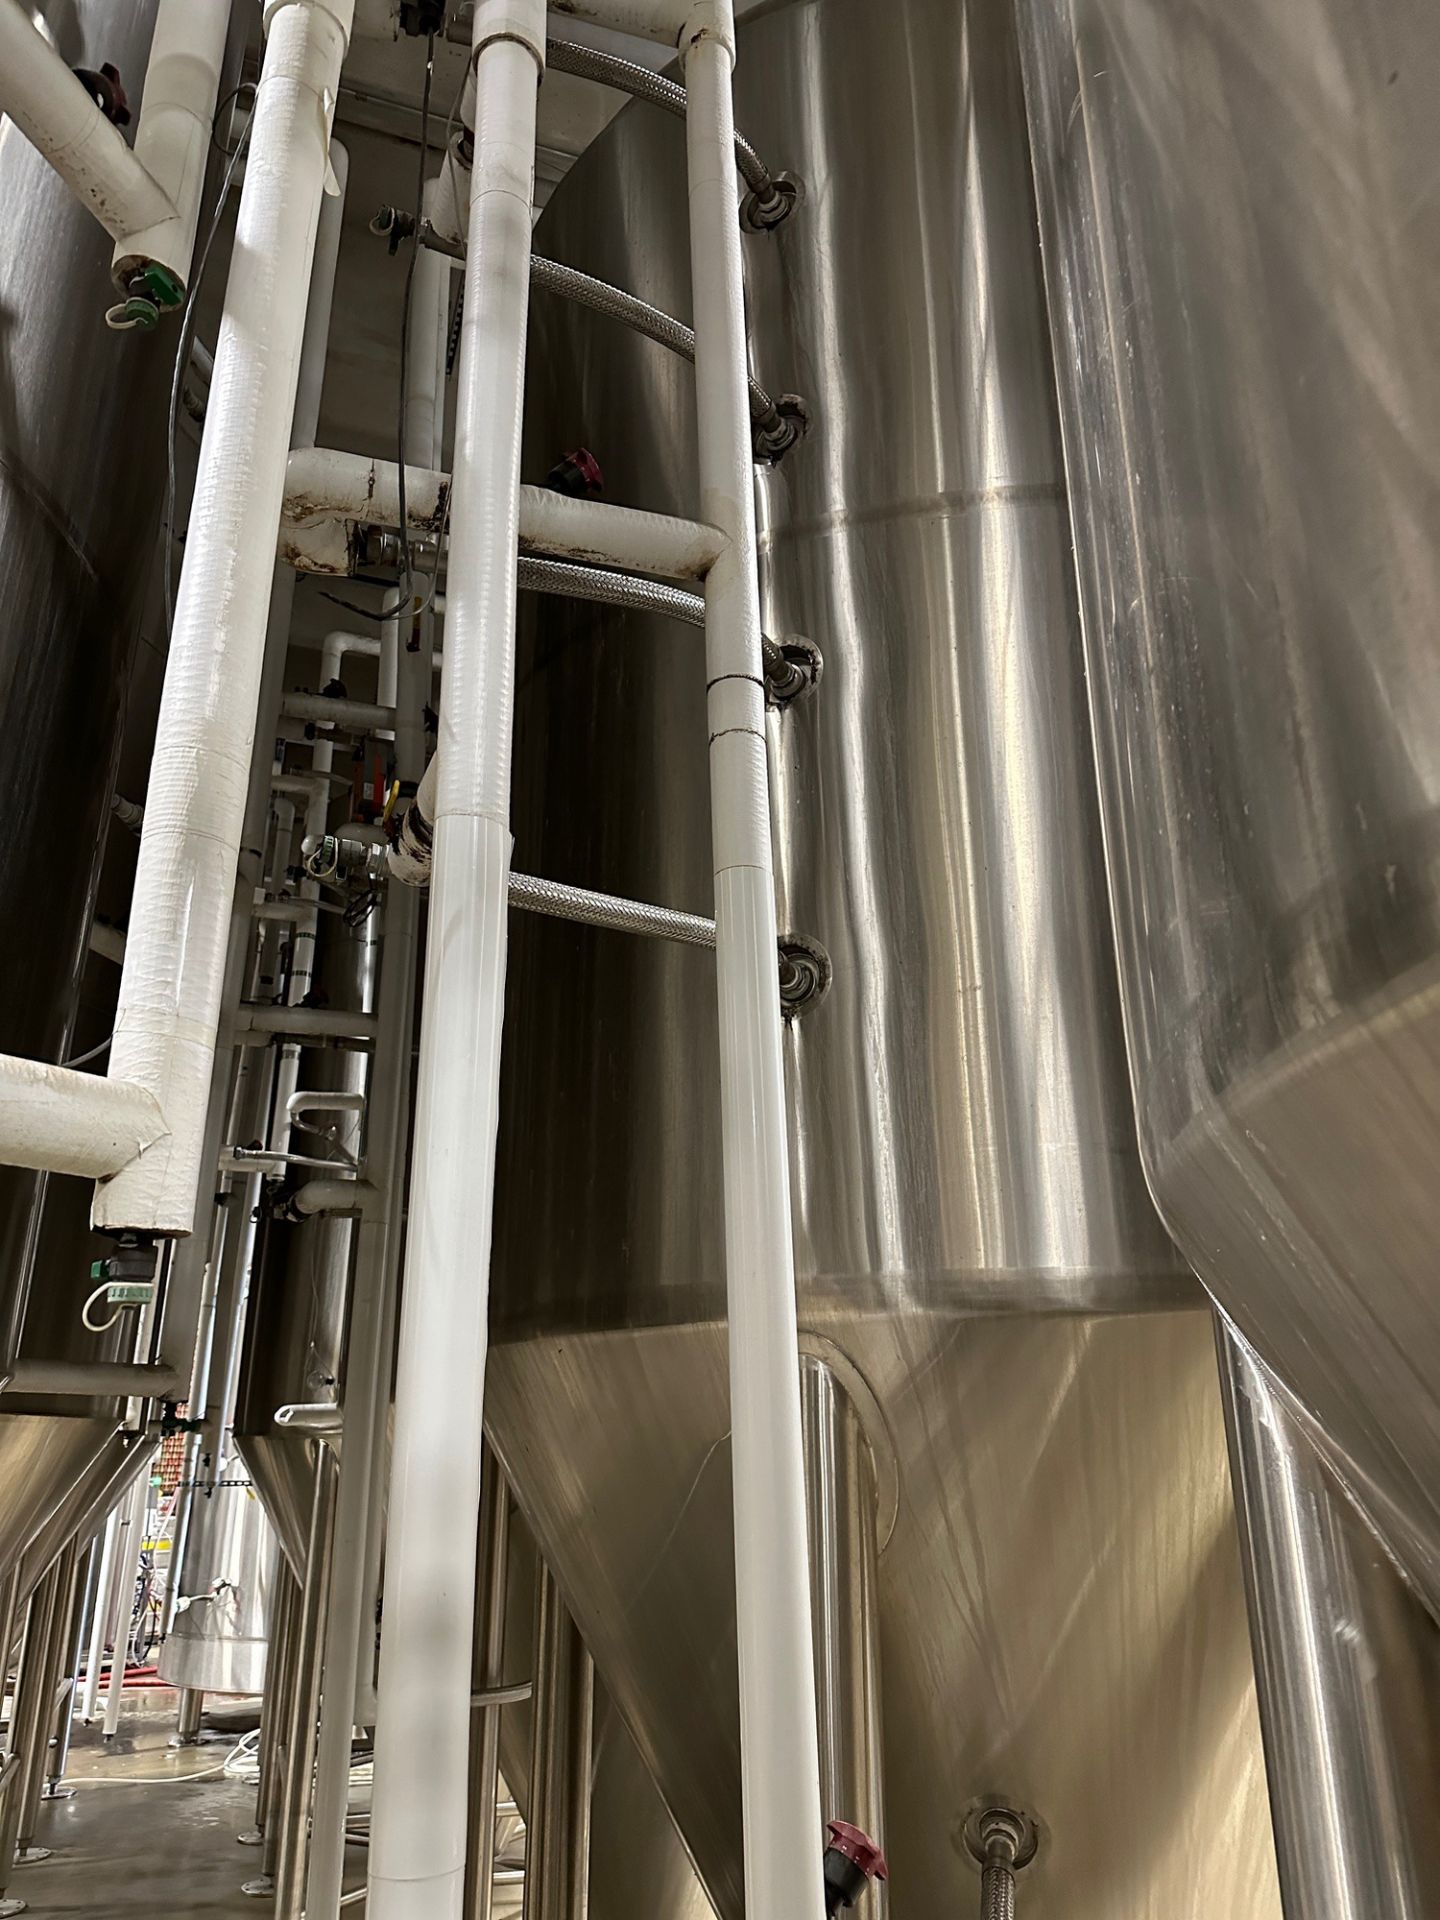 Premier Stainless 80 BBL Stainless Steel Fermentation Tank - Cone Bottom, Glycol Ja | Rig Fee $1850 - Image 2 of 5